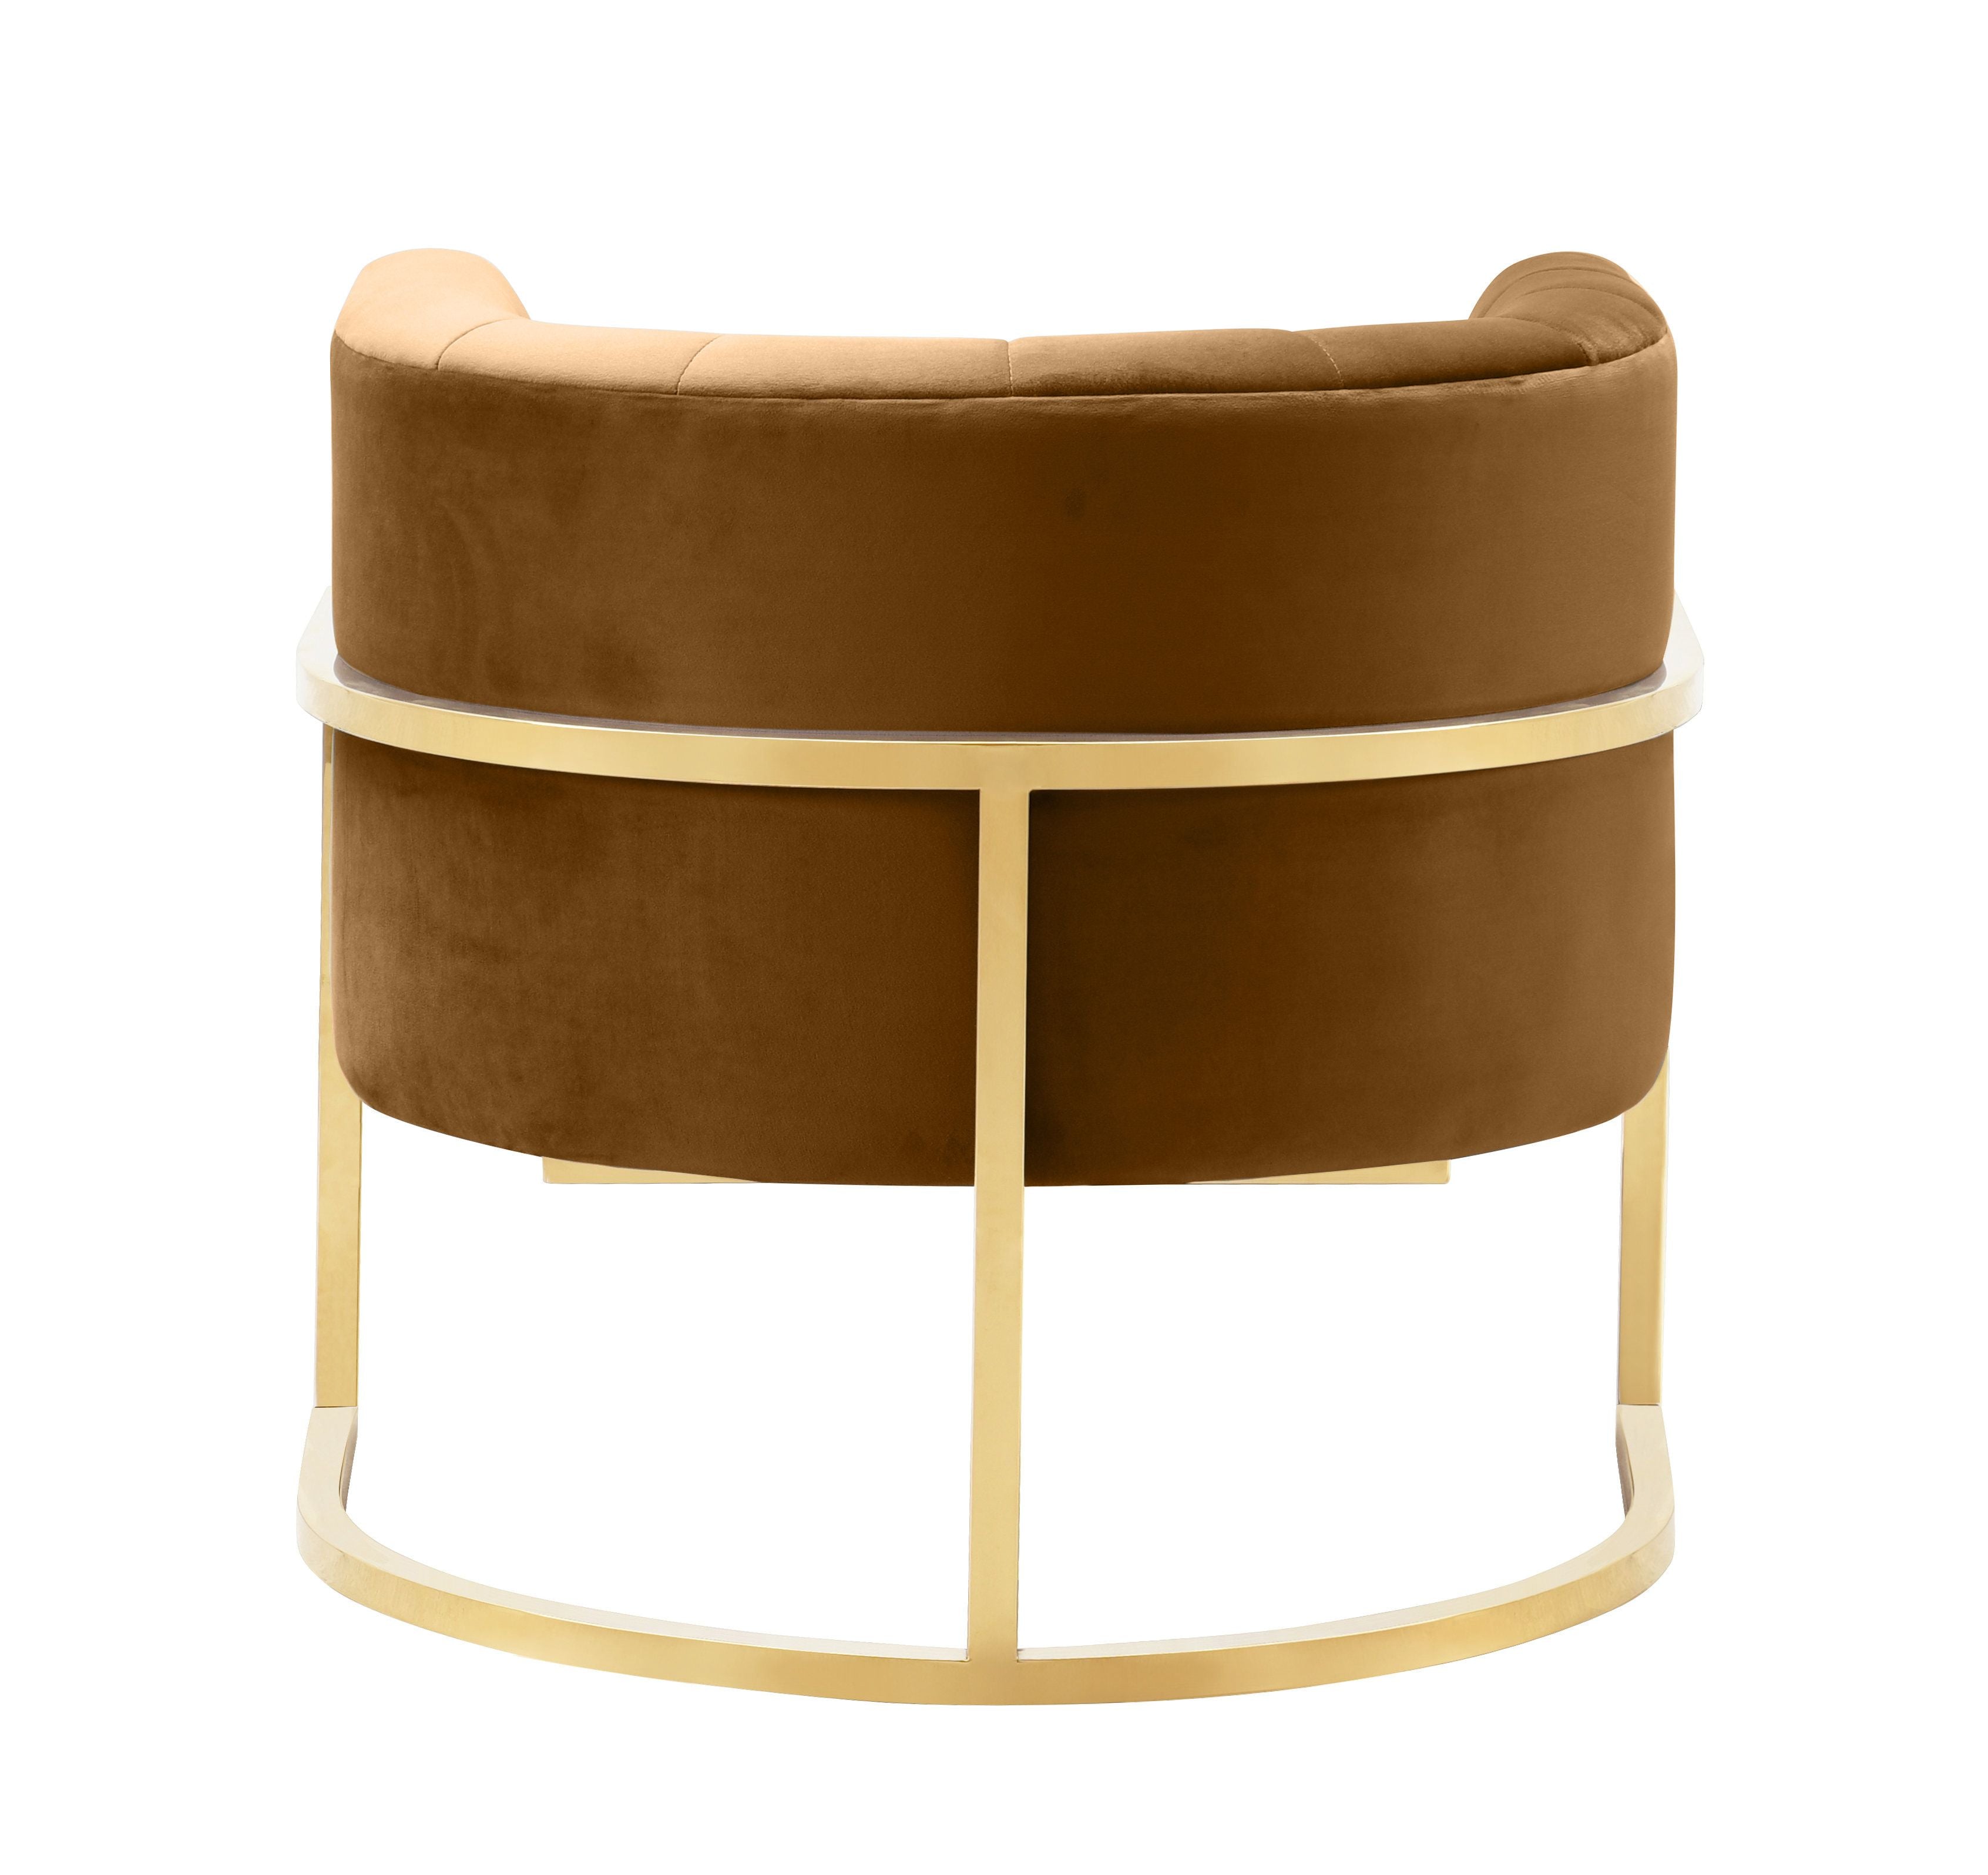 MAGNOLIA SPOTTED CREAM CHAIR WITH GOLD